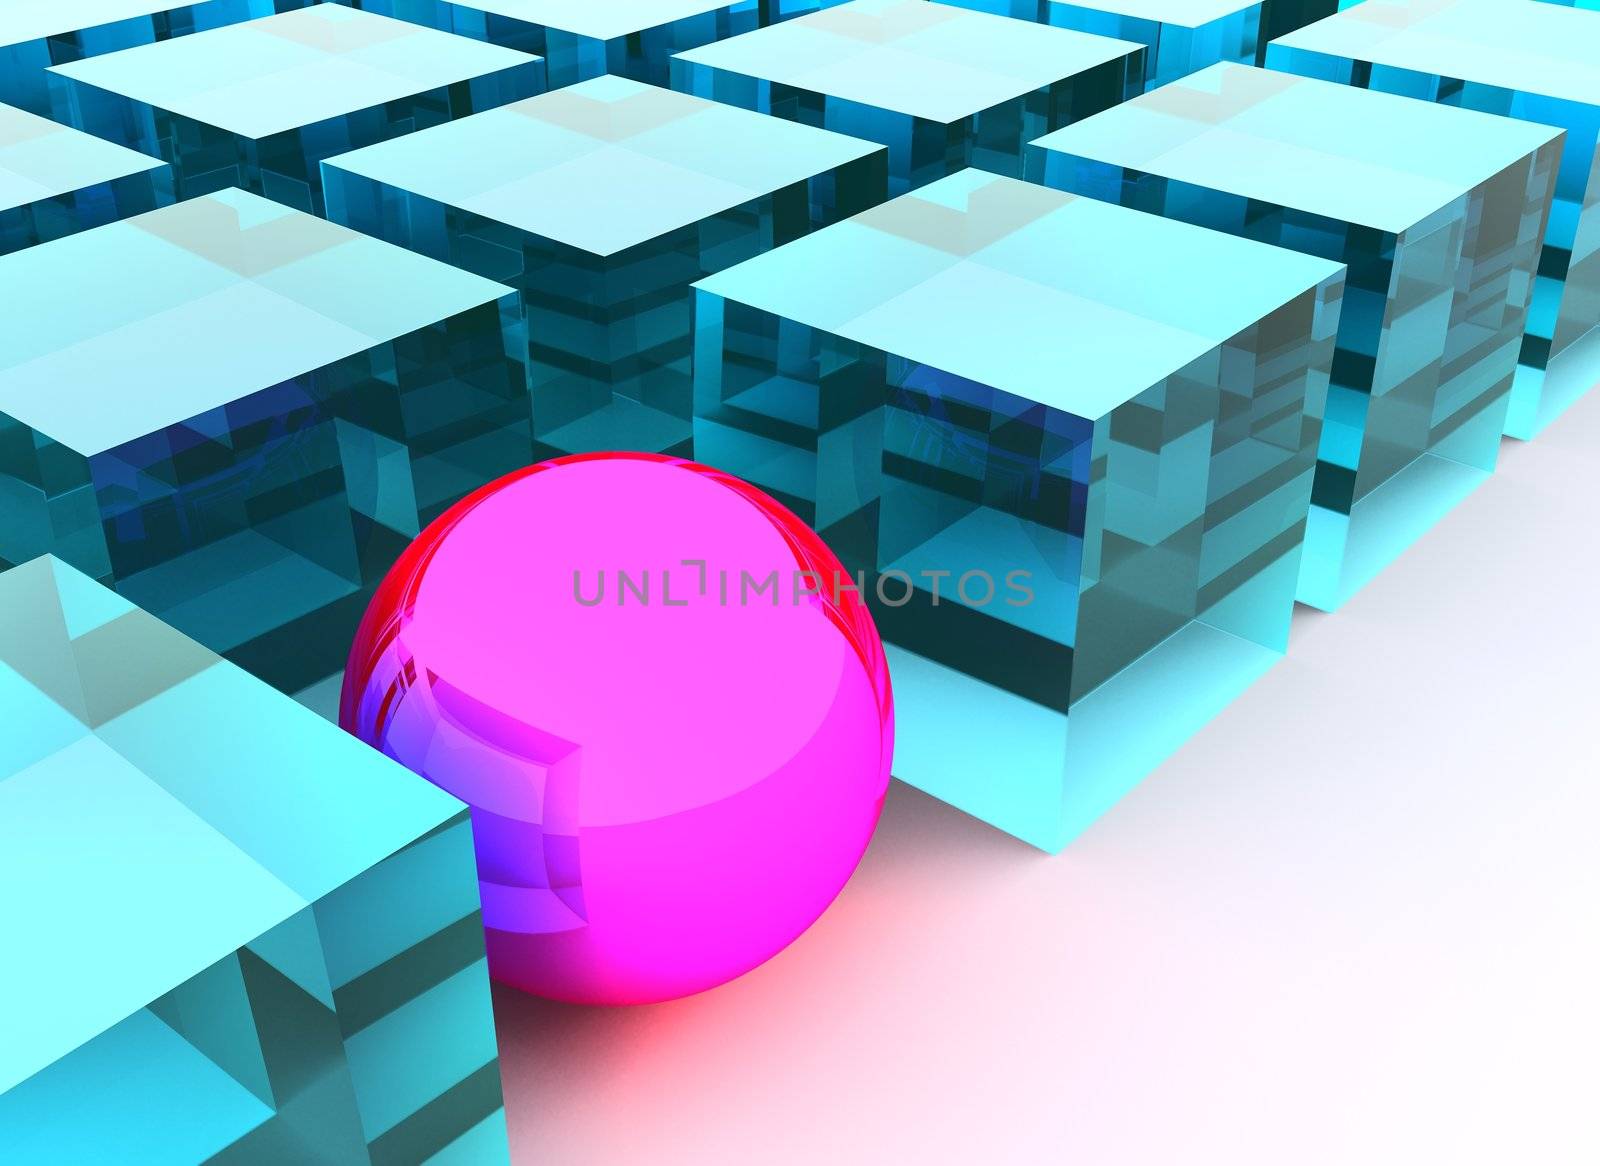 Concept of difference or uniqueness illustrated by Single pink sphere isolated between a lot of similar boxes made of light blue glass.